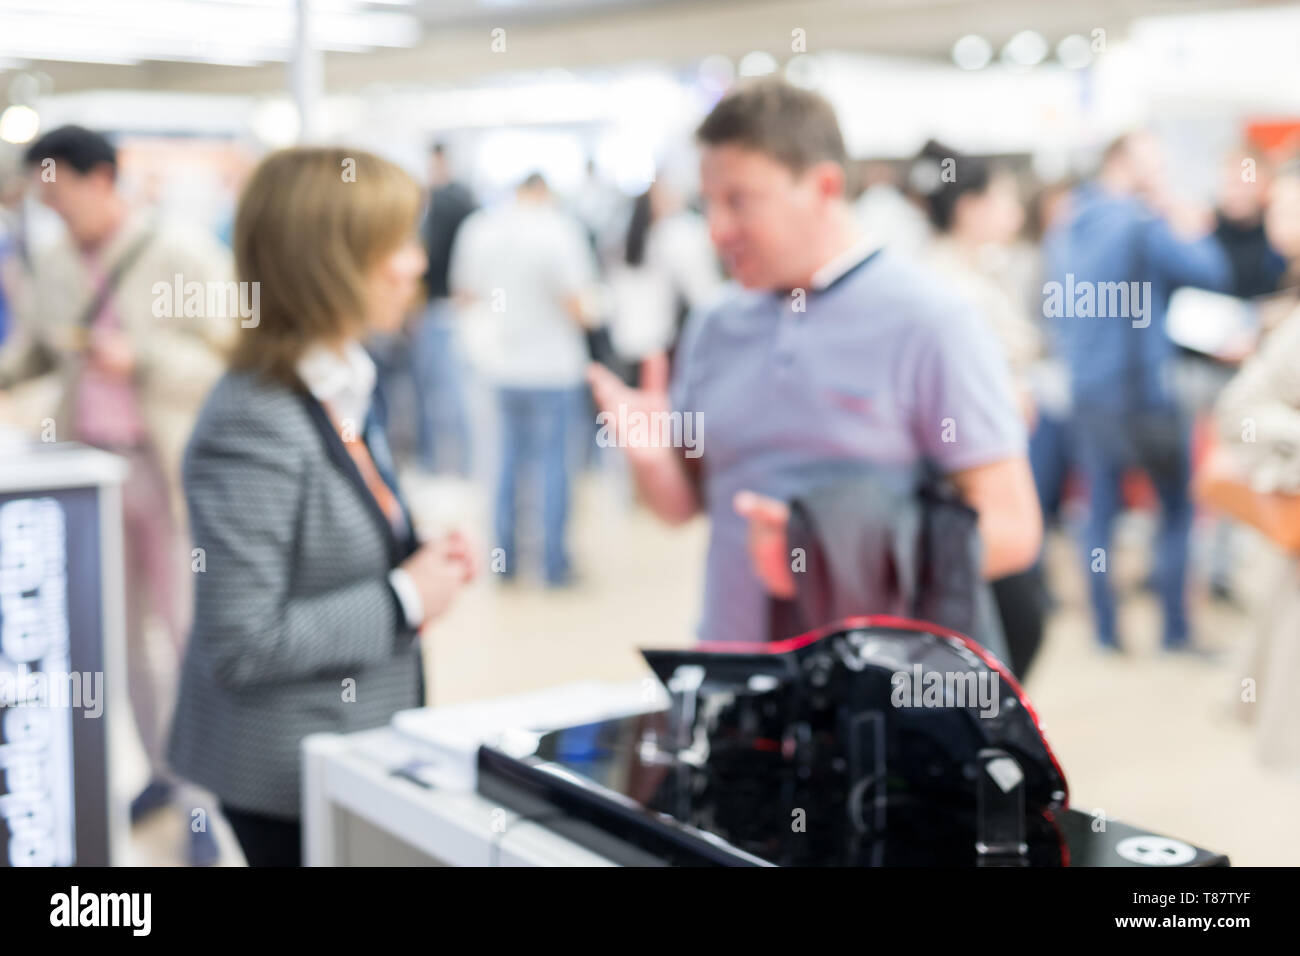 Blured image of businesspeople socializing and networking at business and entrepreneurship meeting. Stock Photo